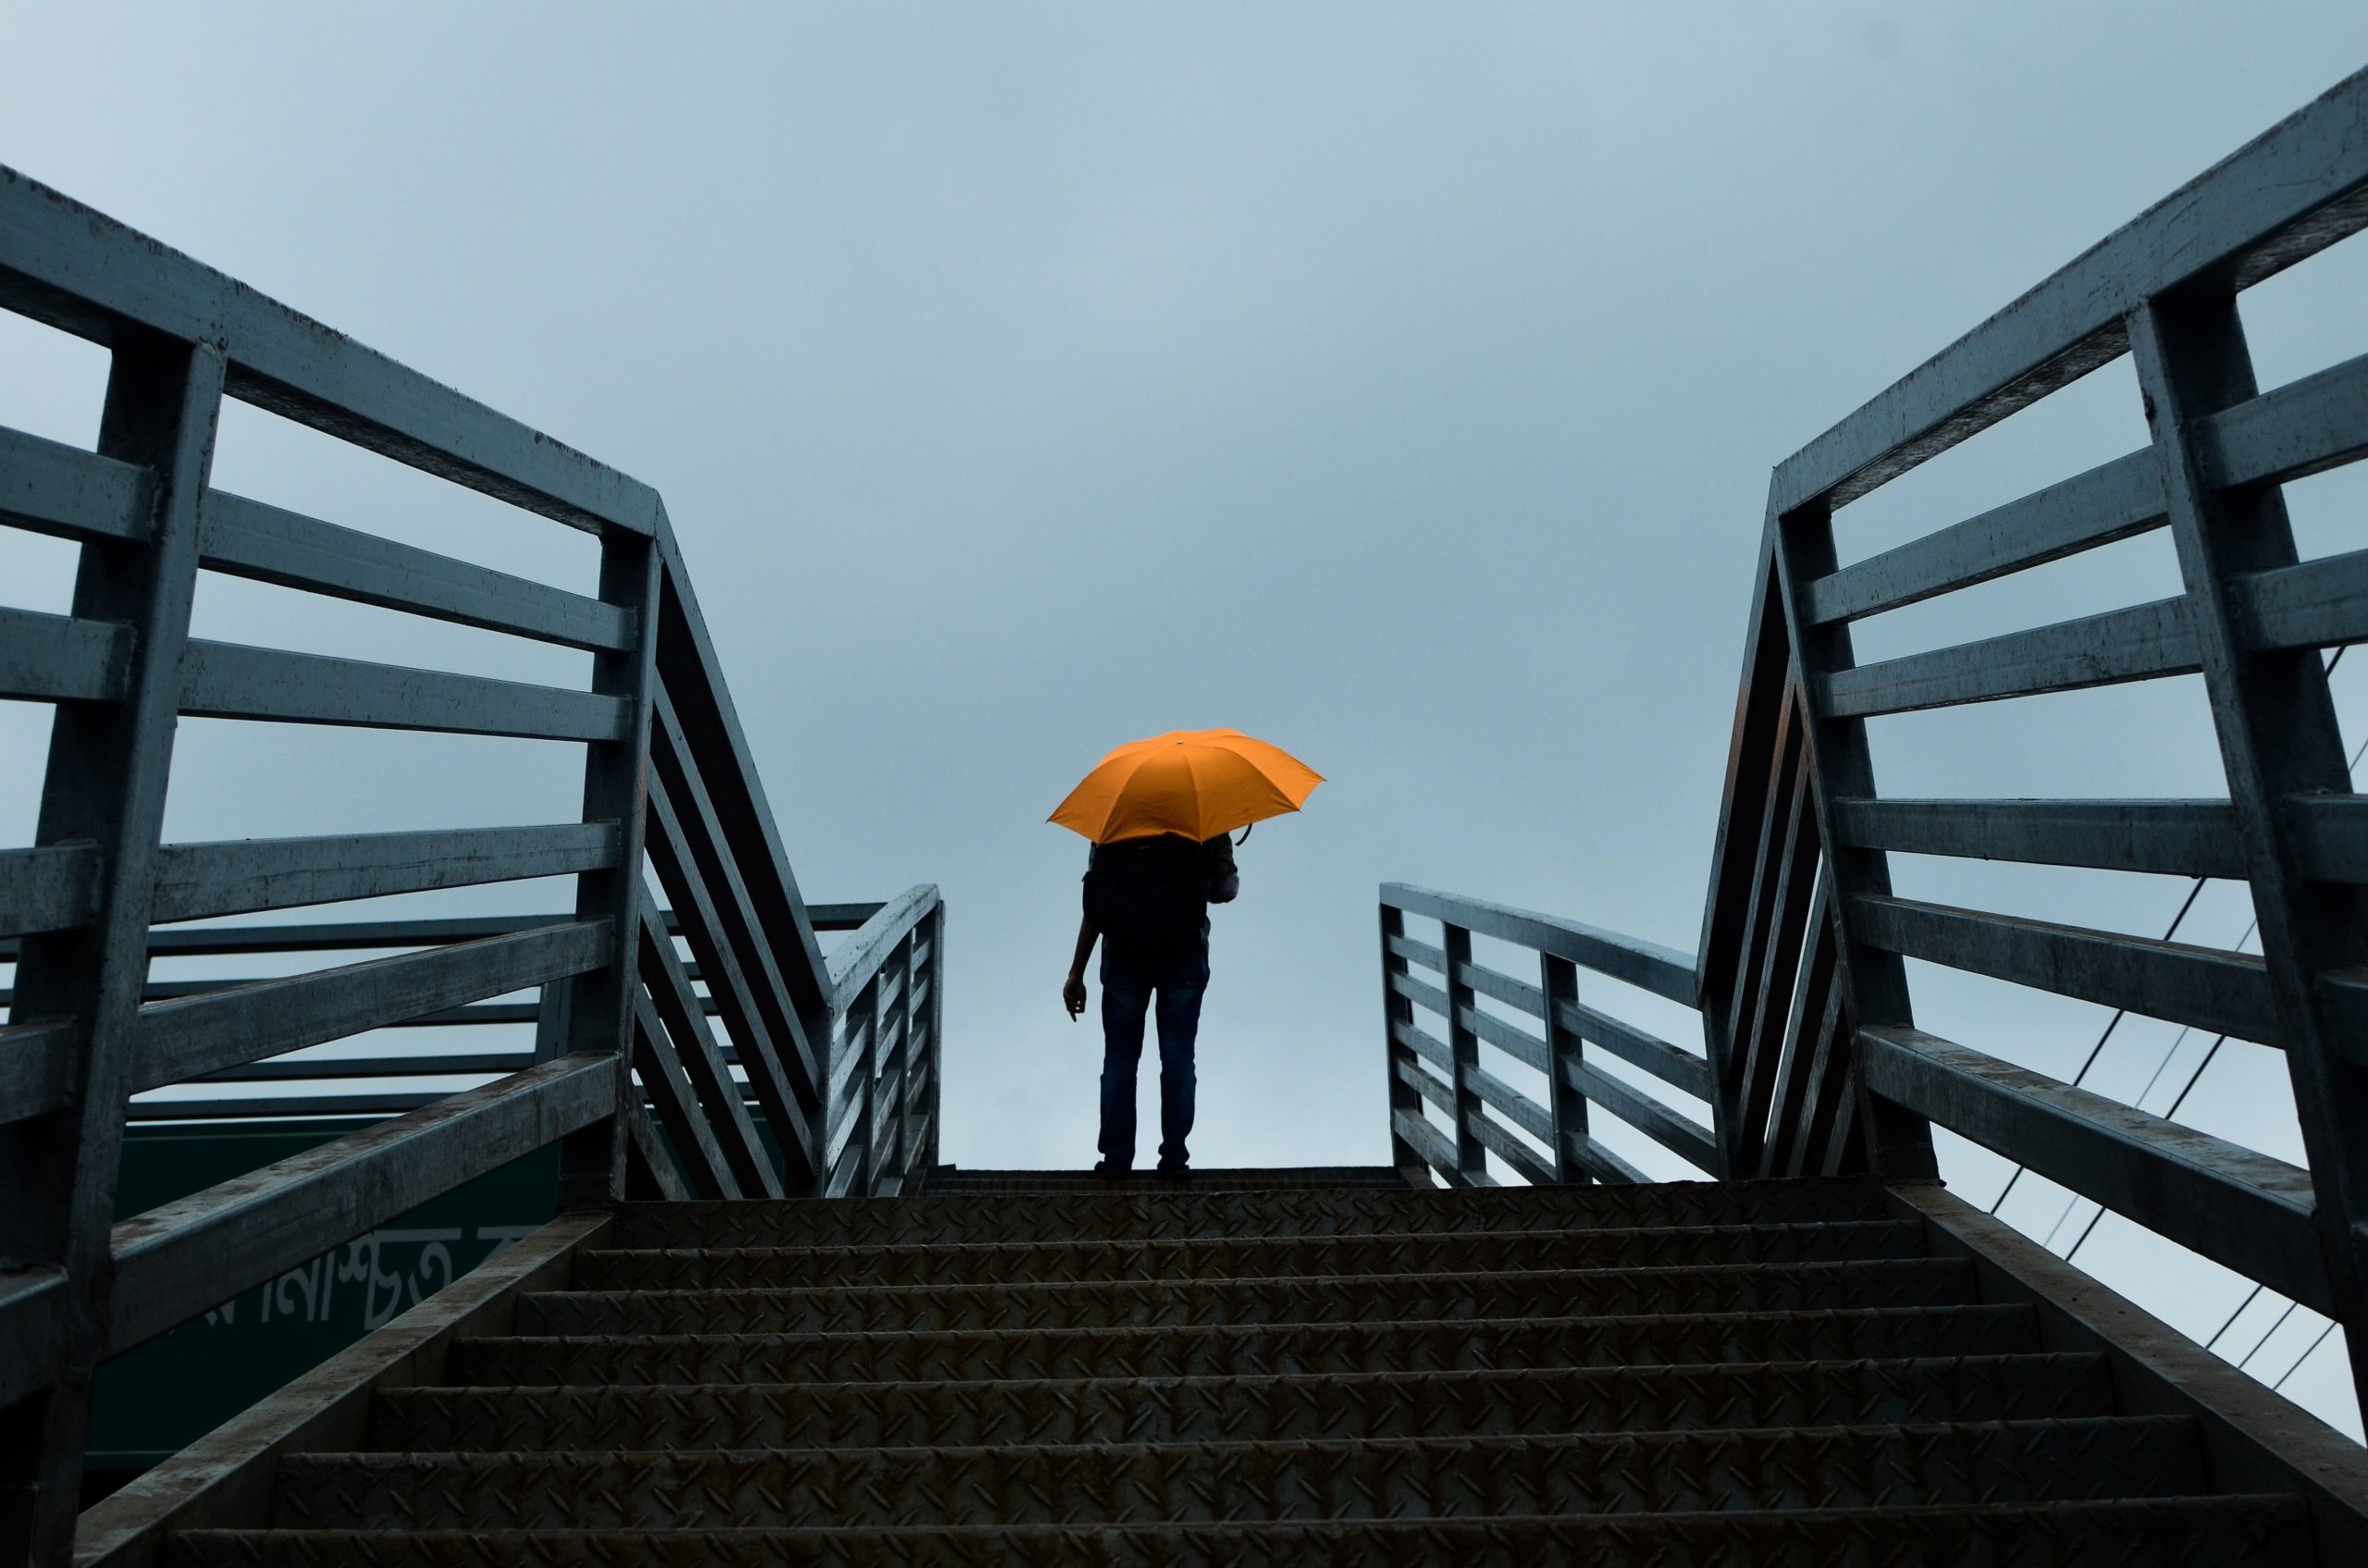 person-holding-umbrella-standing-above-stairs-1695056